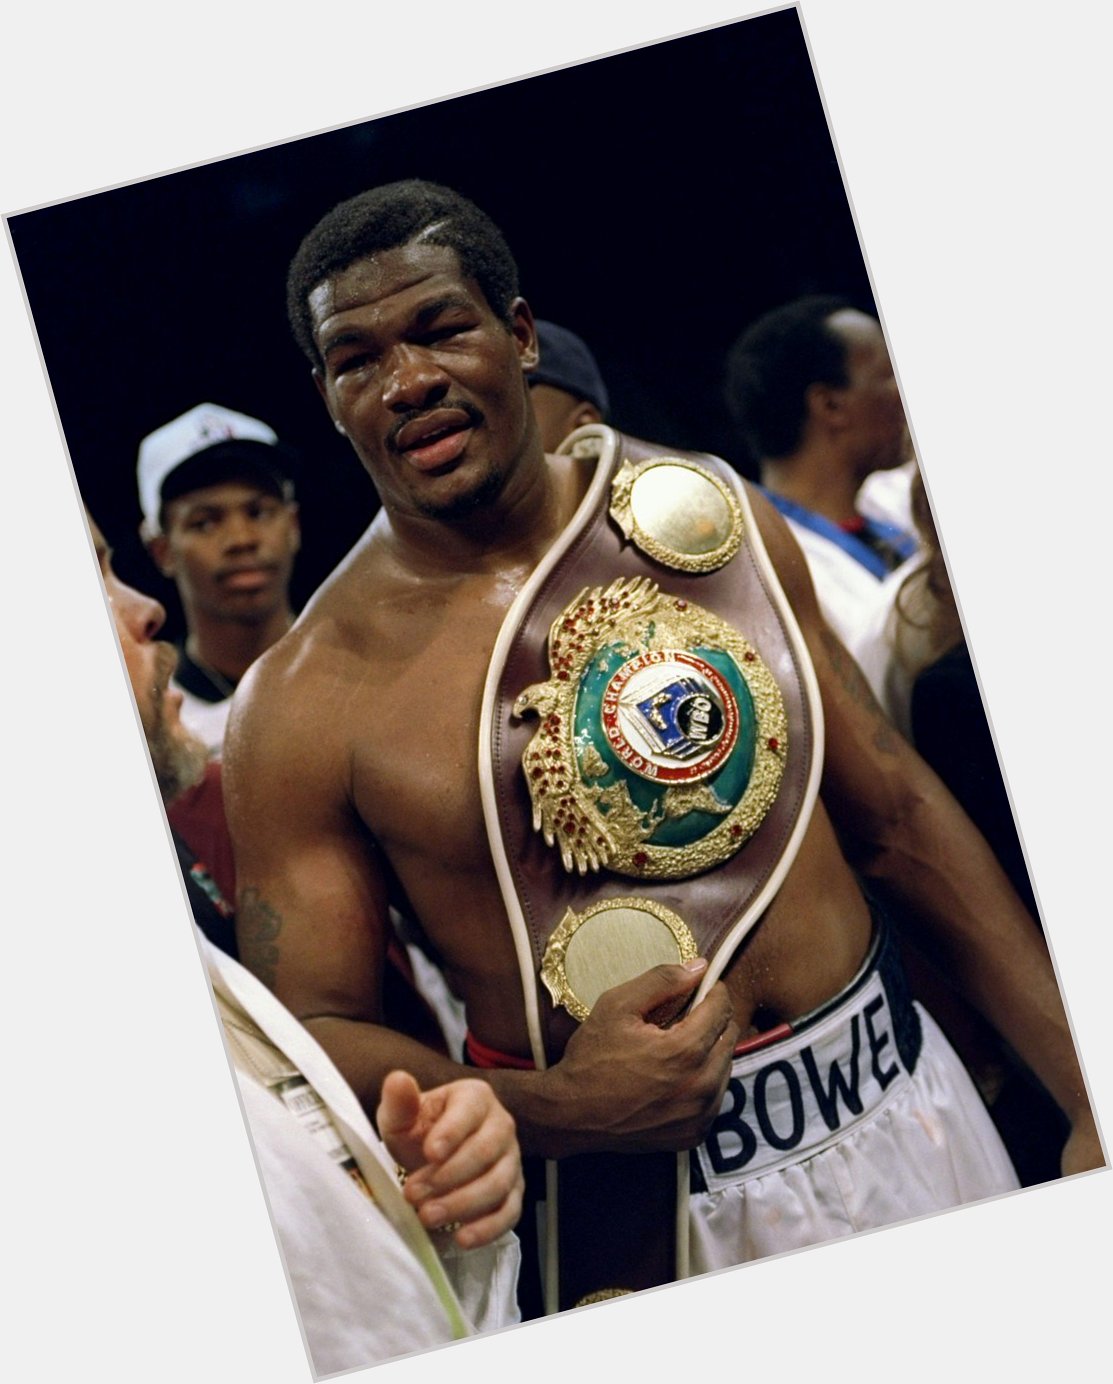 Happy 48th birthday to two-time world heavyweight boxing champion Riddick Bowe! 